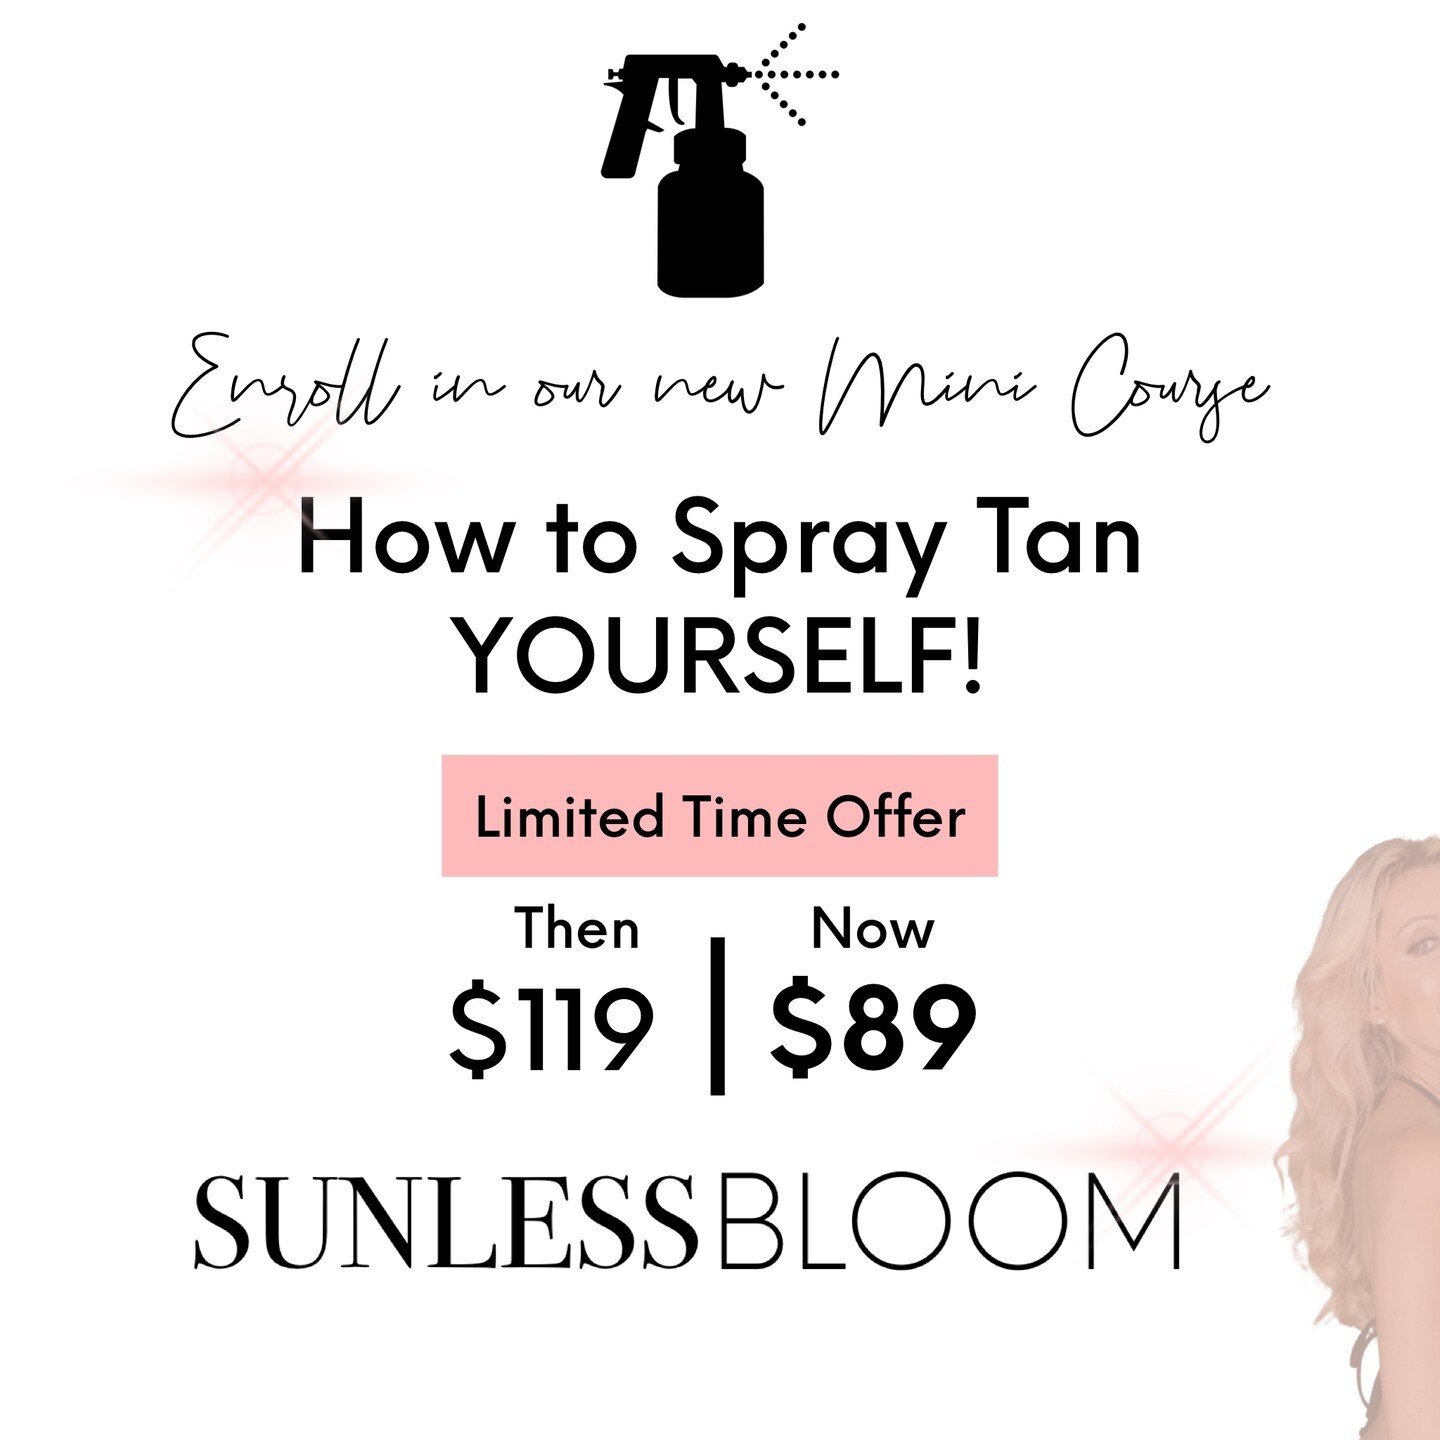 Launched!! Woo Hoo!

Our 1st Mini Course has launched and I couldn&rsquo;t be more exited for everyone who&rsquo;s requested this training!

In this course you will learn:

+HOW TO APPLY AN EVEN SUNLESS TAN ON YOURSELF

+HOW TO CHOSE THE BEST MACHINE